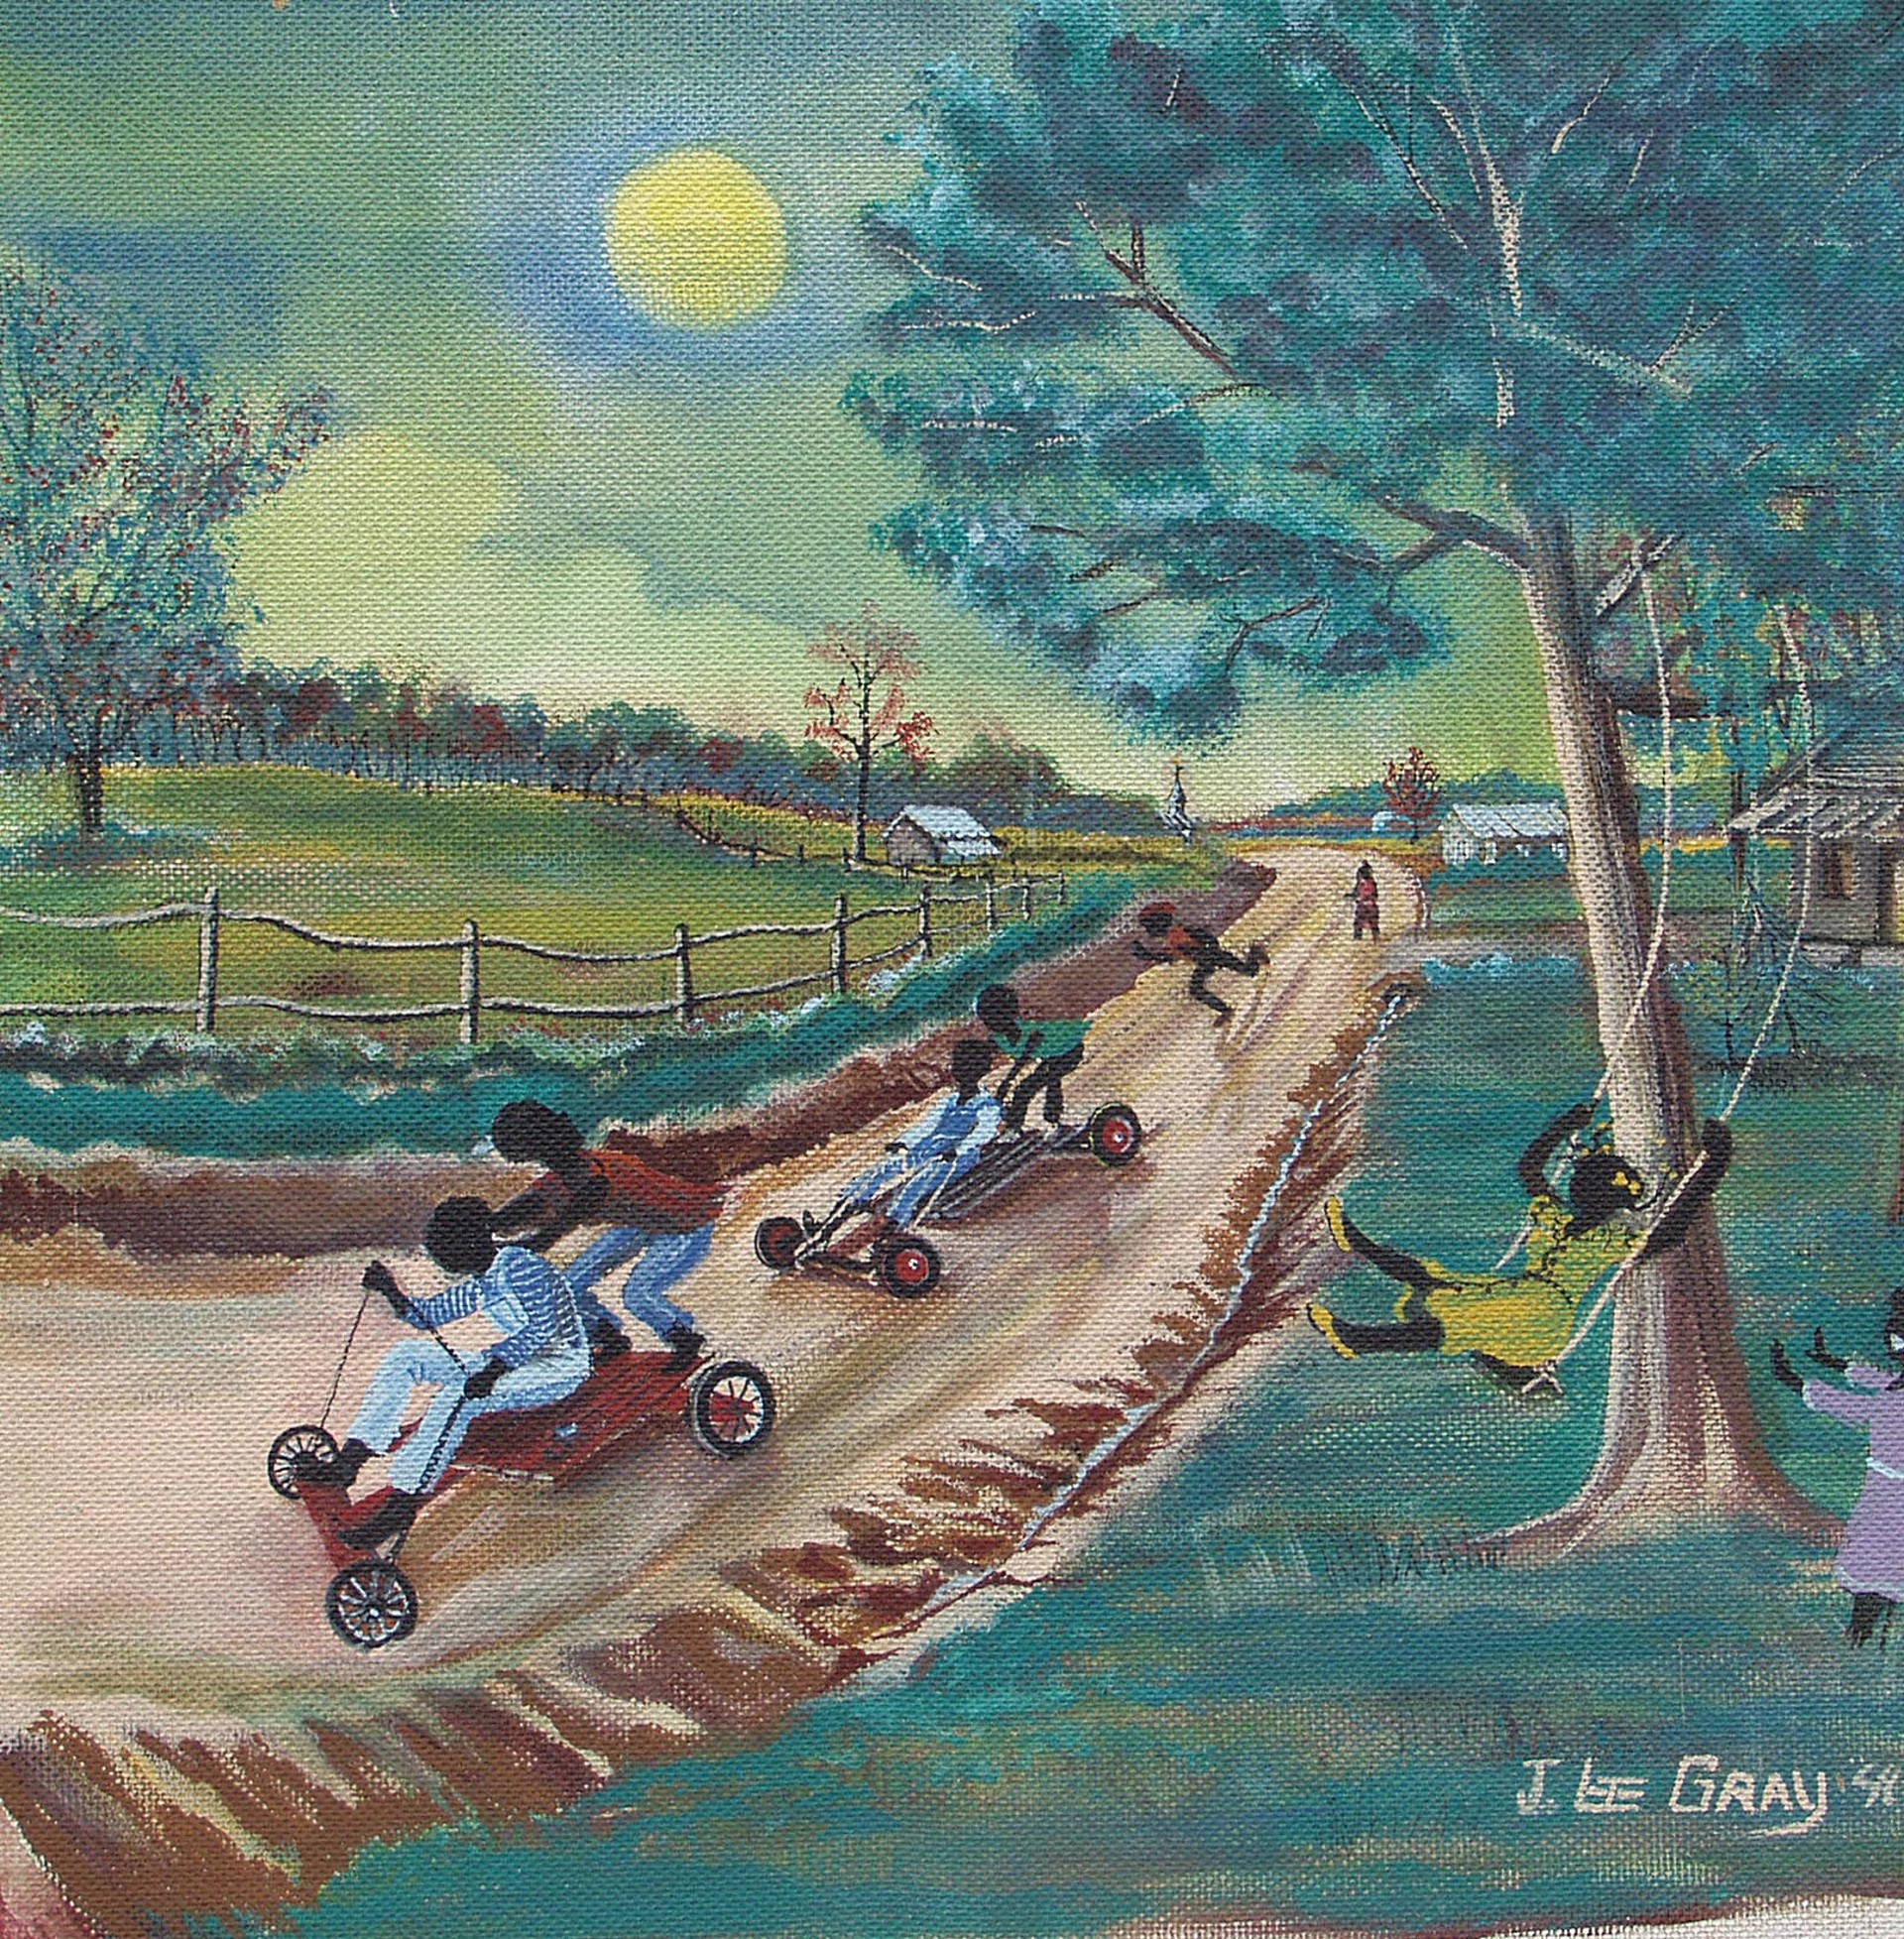 The Race by Johnnie Lee Gray